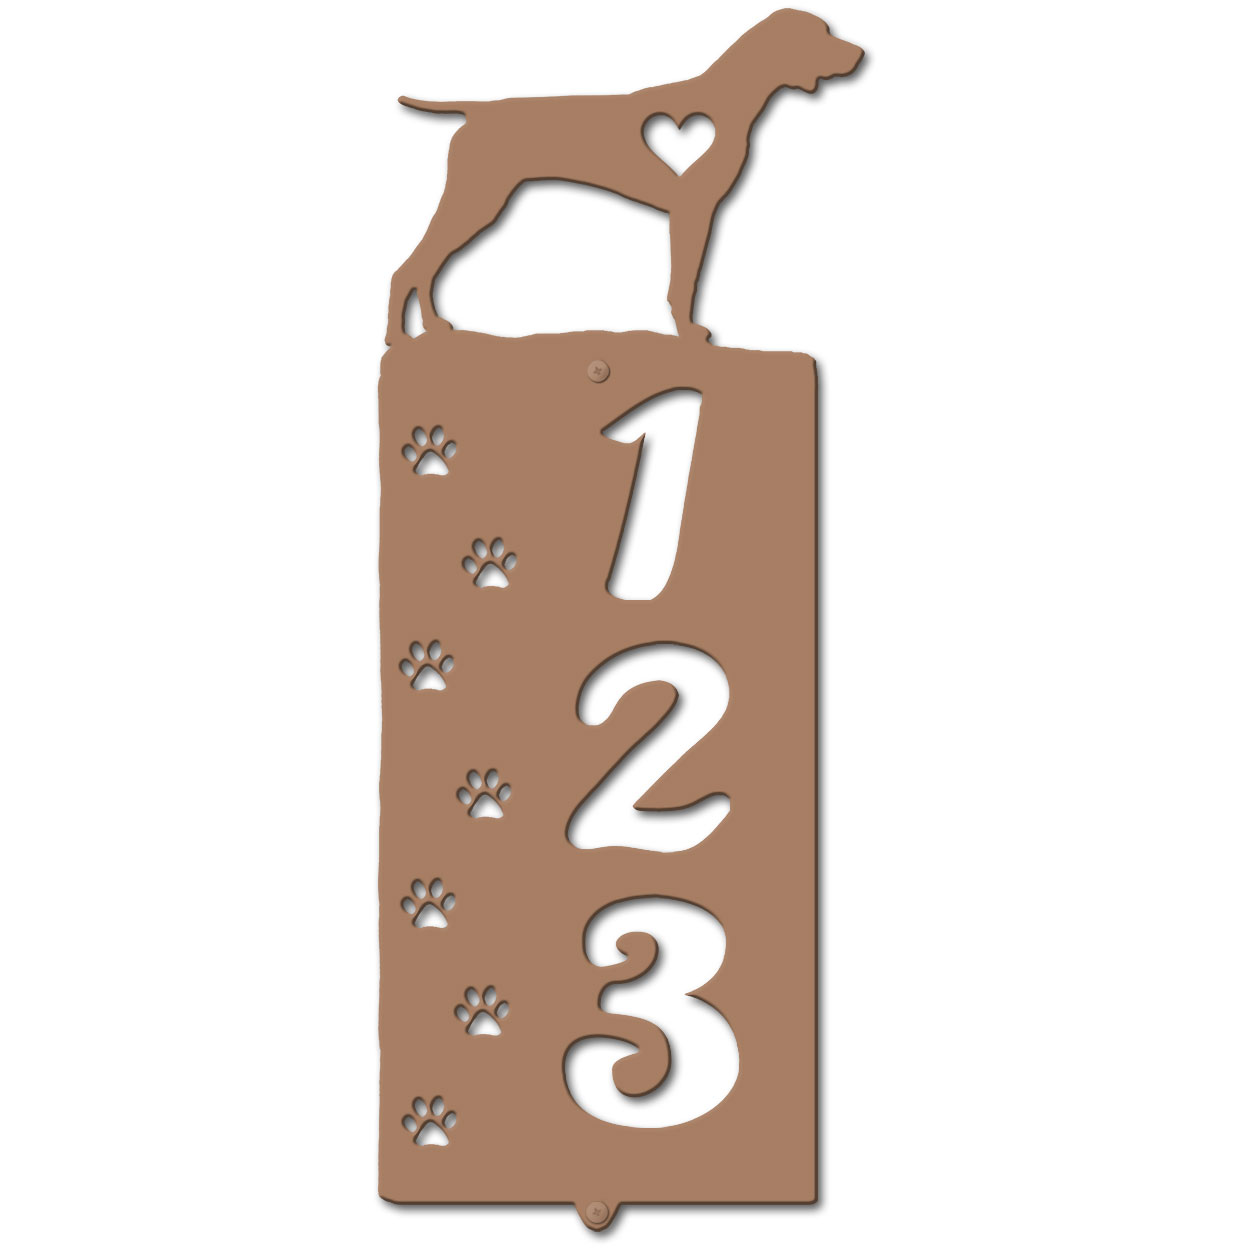 636283 - Pointer Cut Outs Three Digit Address Number Plaque